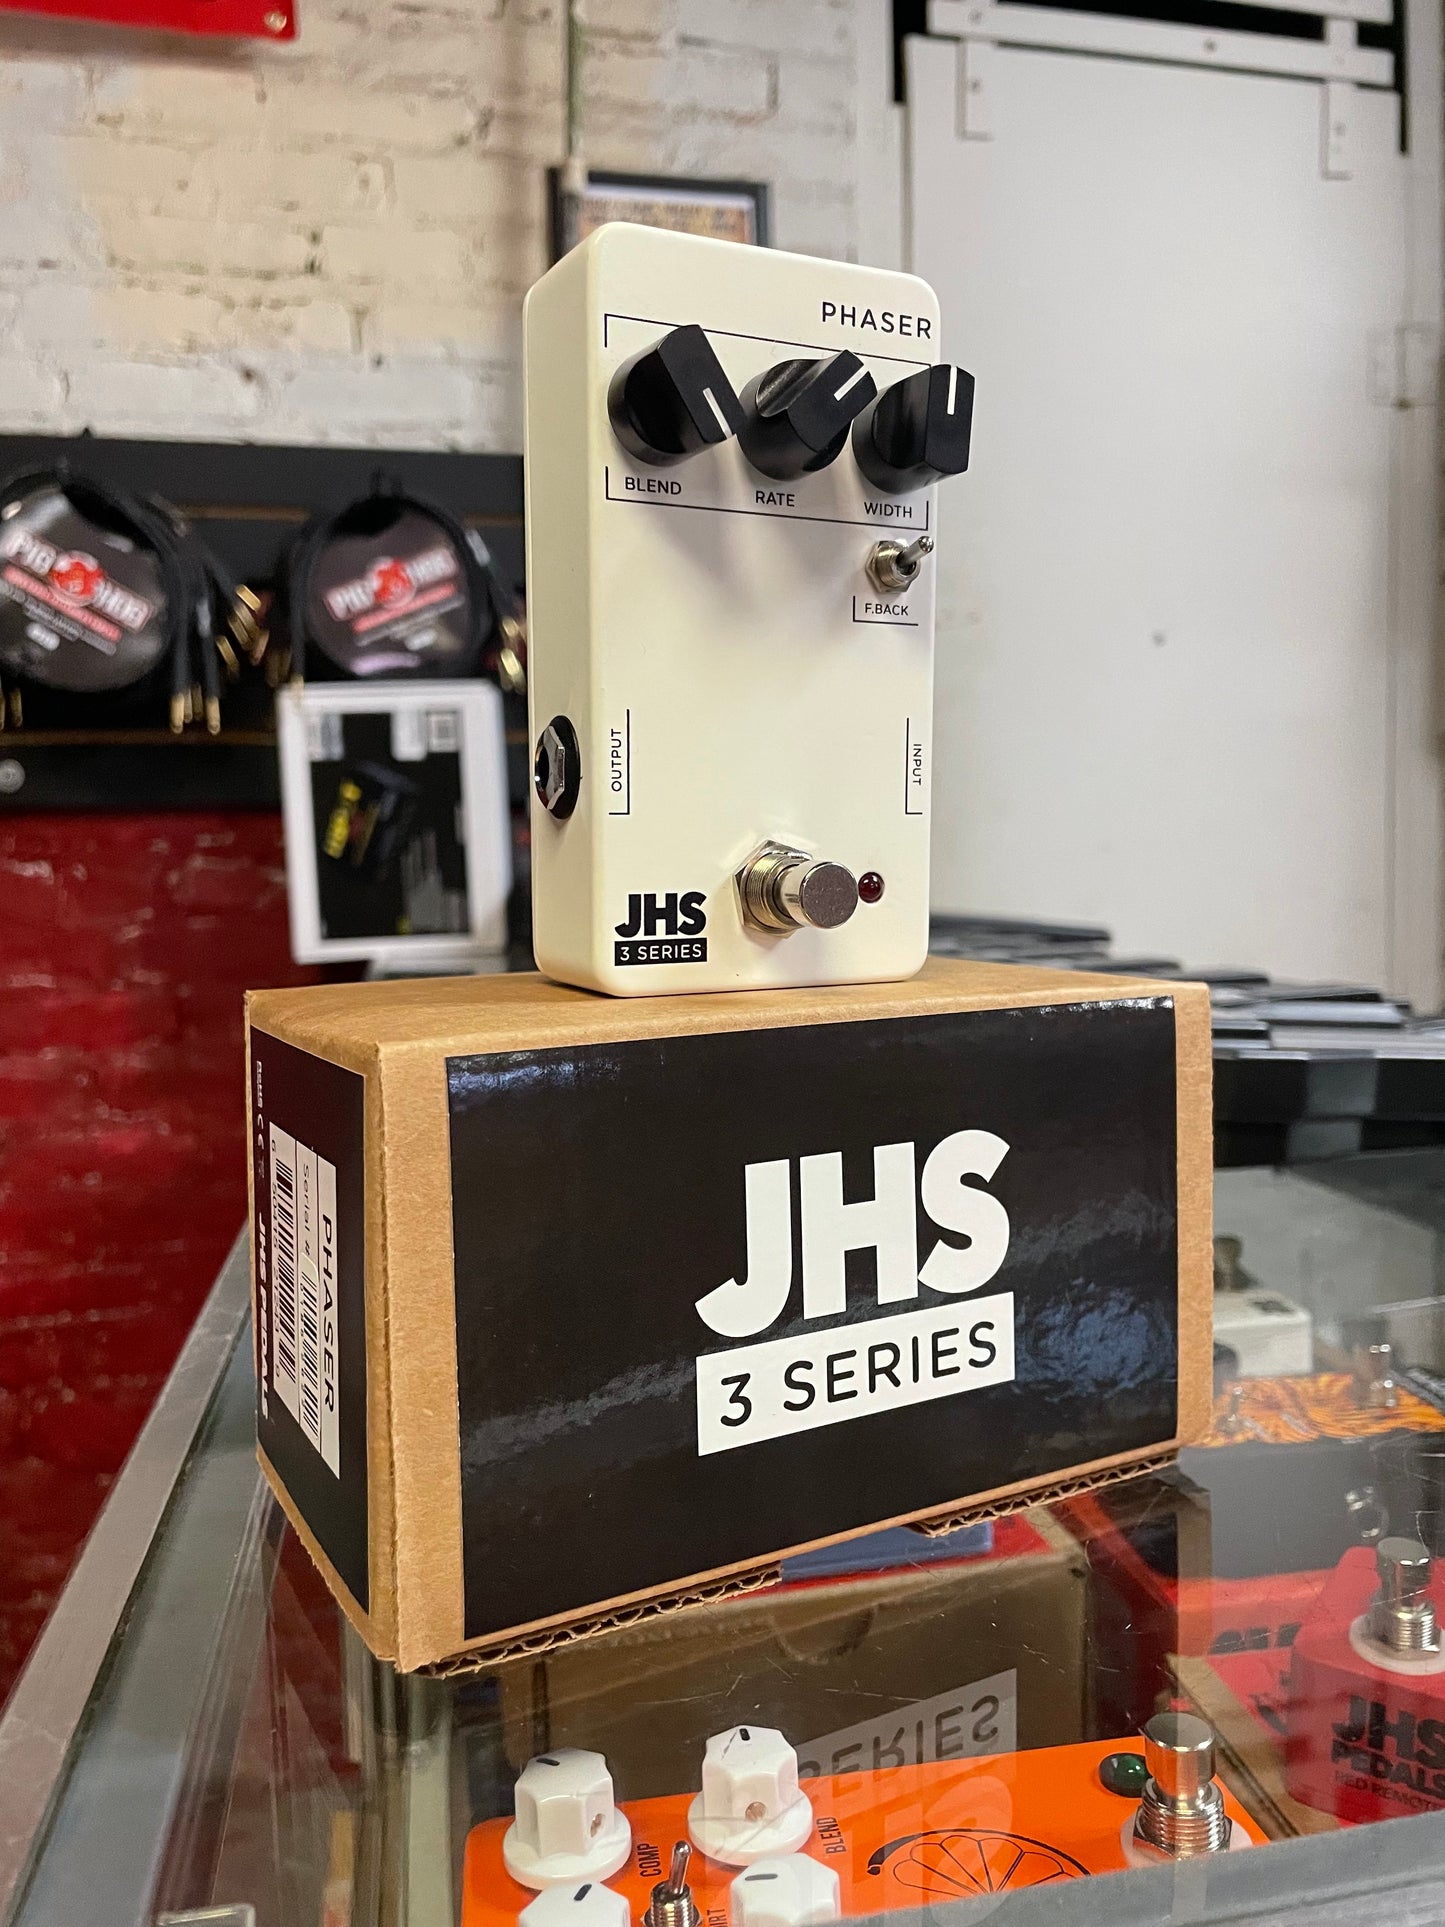 JHS 3 Series Phaser (NEW)